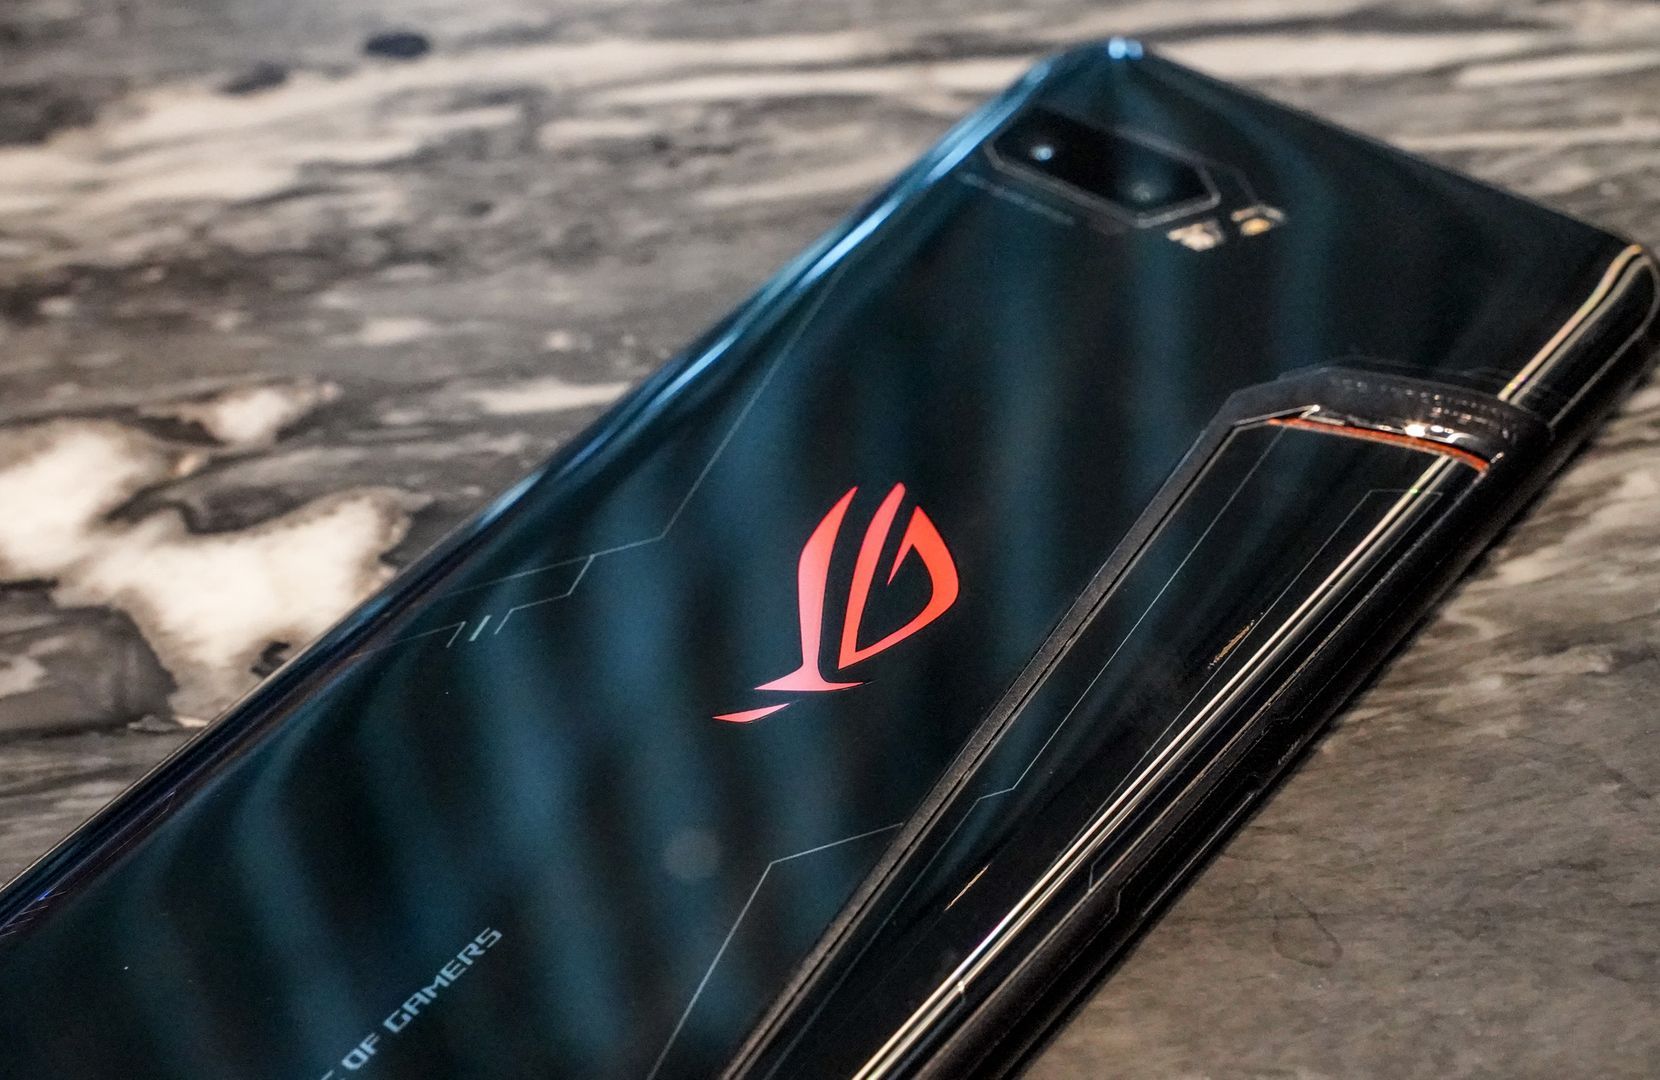 ASUS ROG Phone II Ultimate Edition: 120 Hz, 12 GB / 1 TB with 6000 mAh